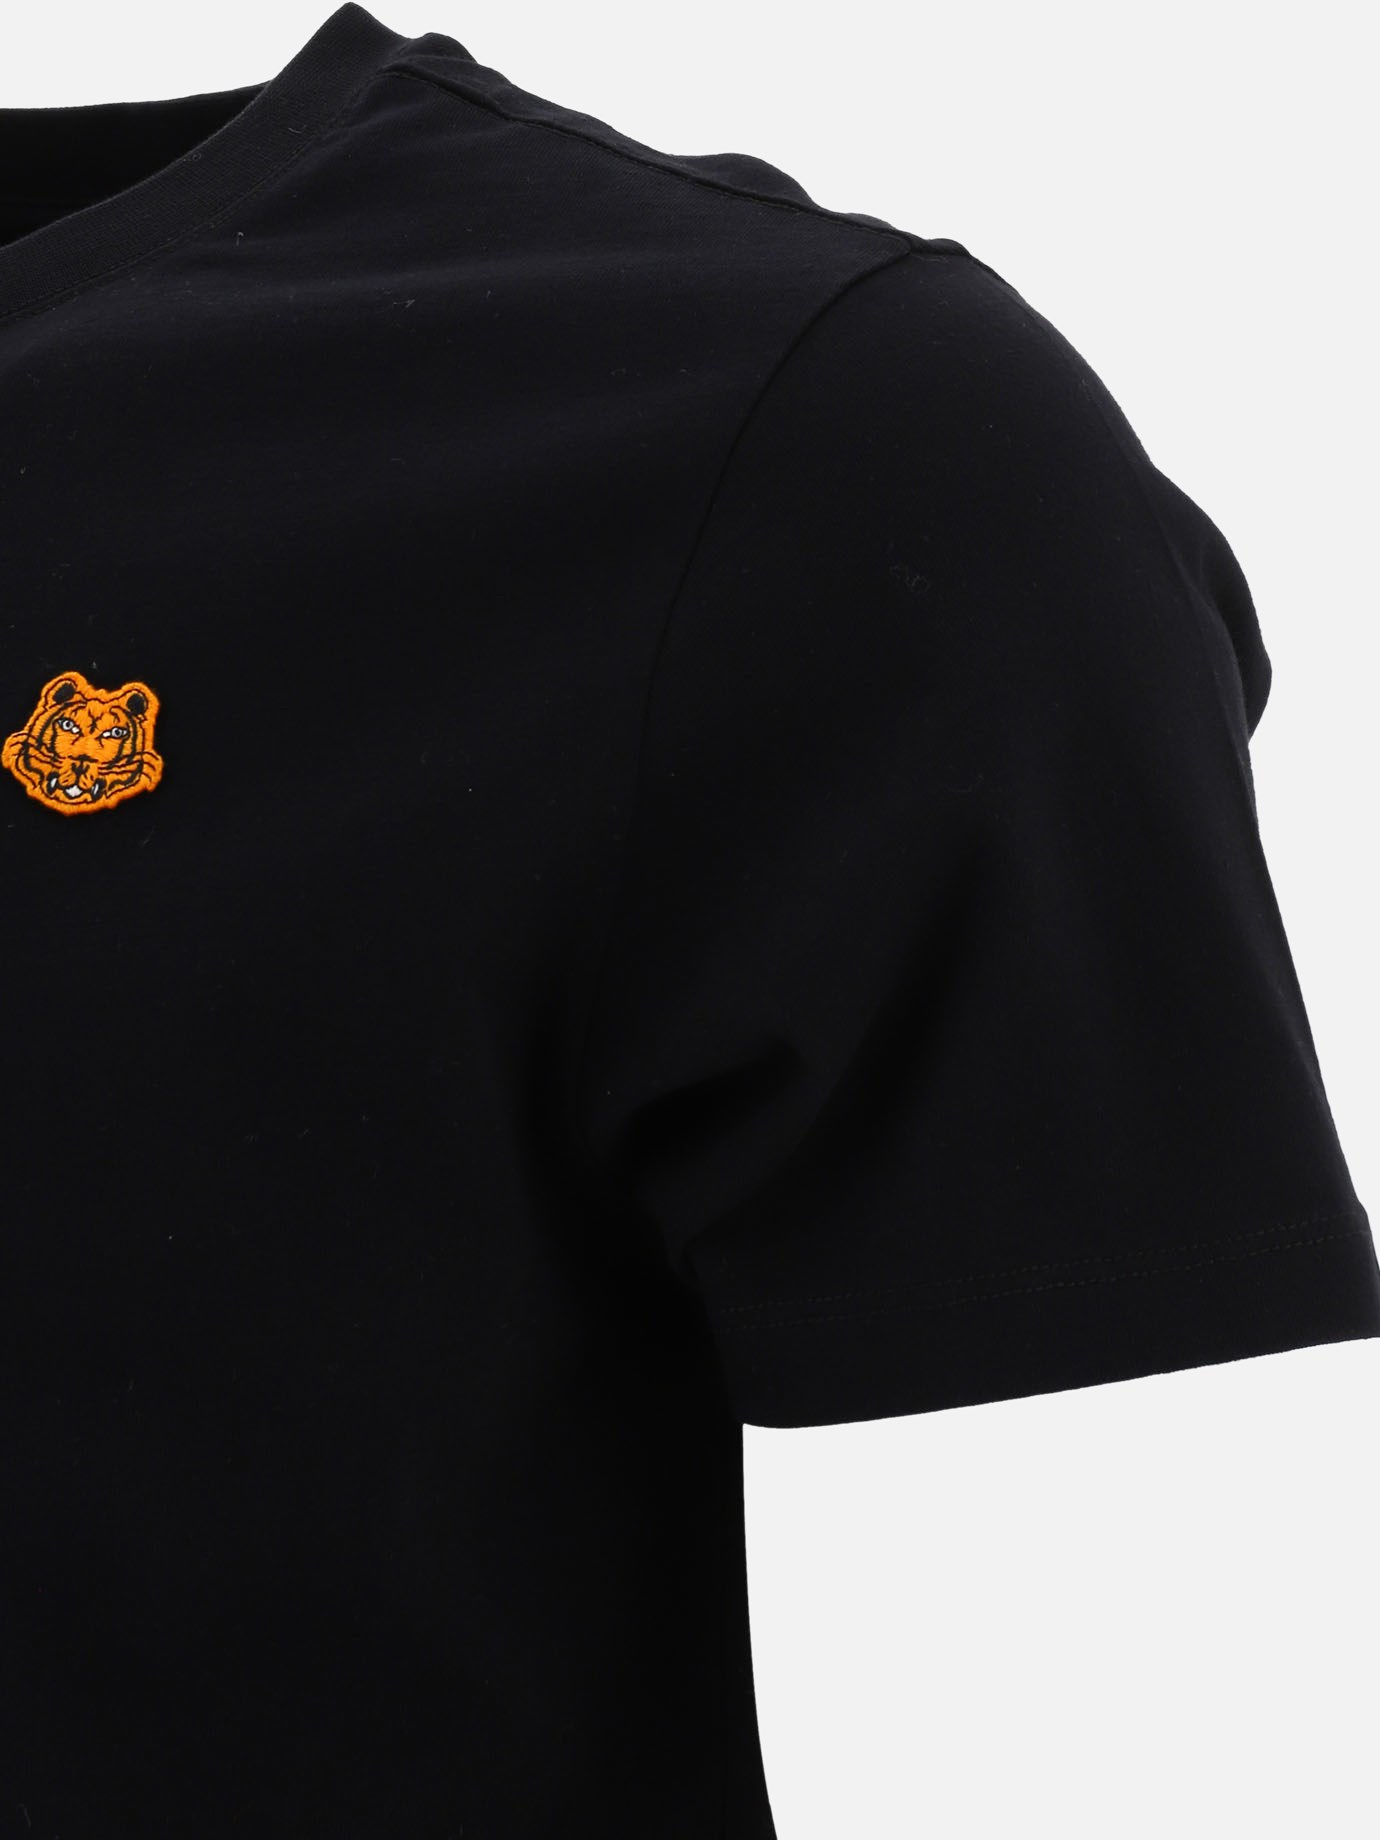  Tiger Crest  t-shirt by Kenzo